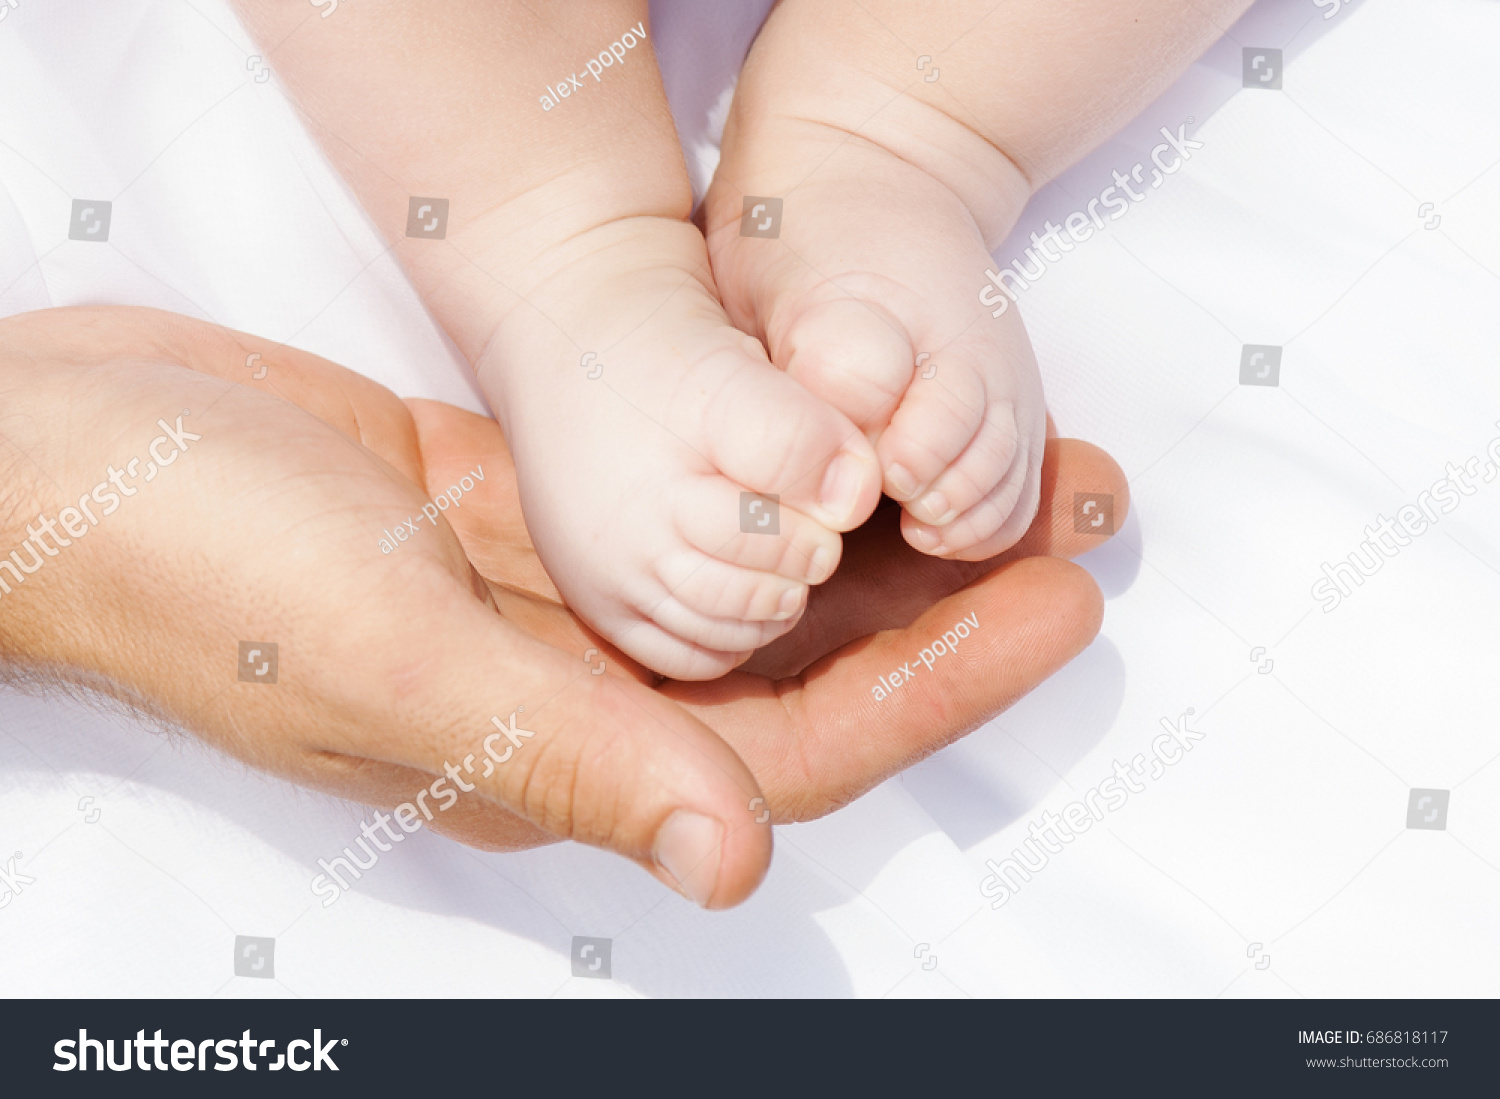 The legs of the child on the father's hands. Little Newborn Baby's feet on male Shaped hands on the white background.Sensual conceptual image of fatherhood. Concept of happy family #686818117